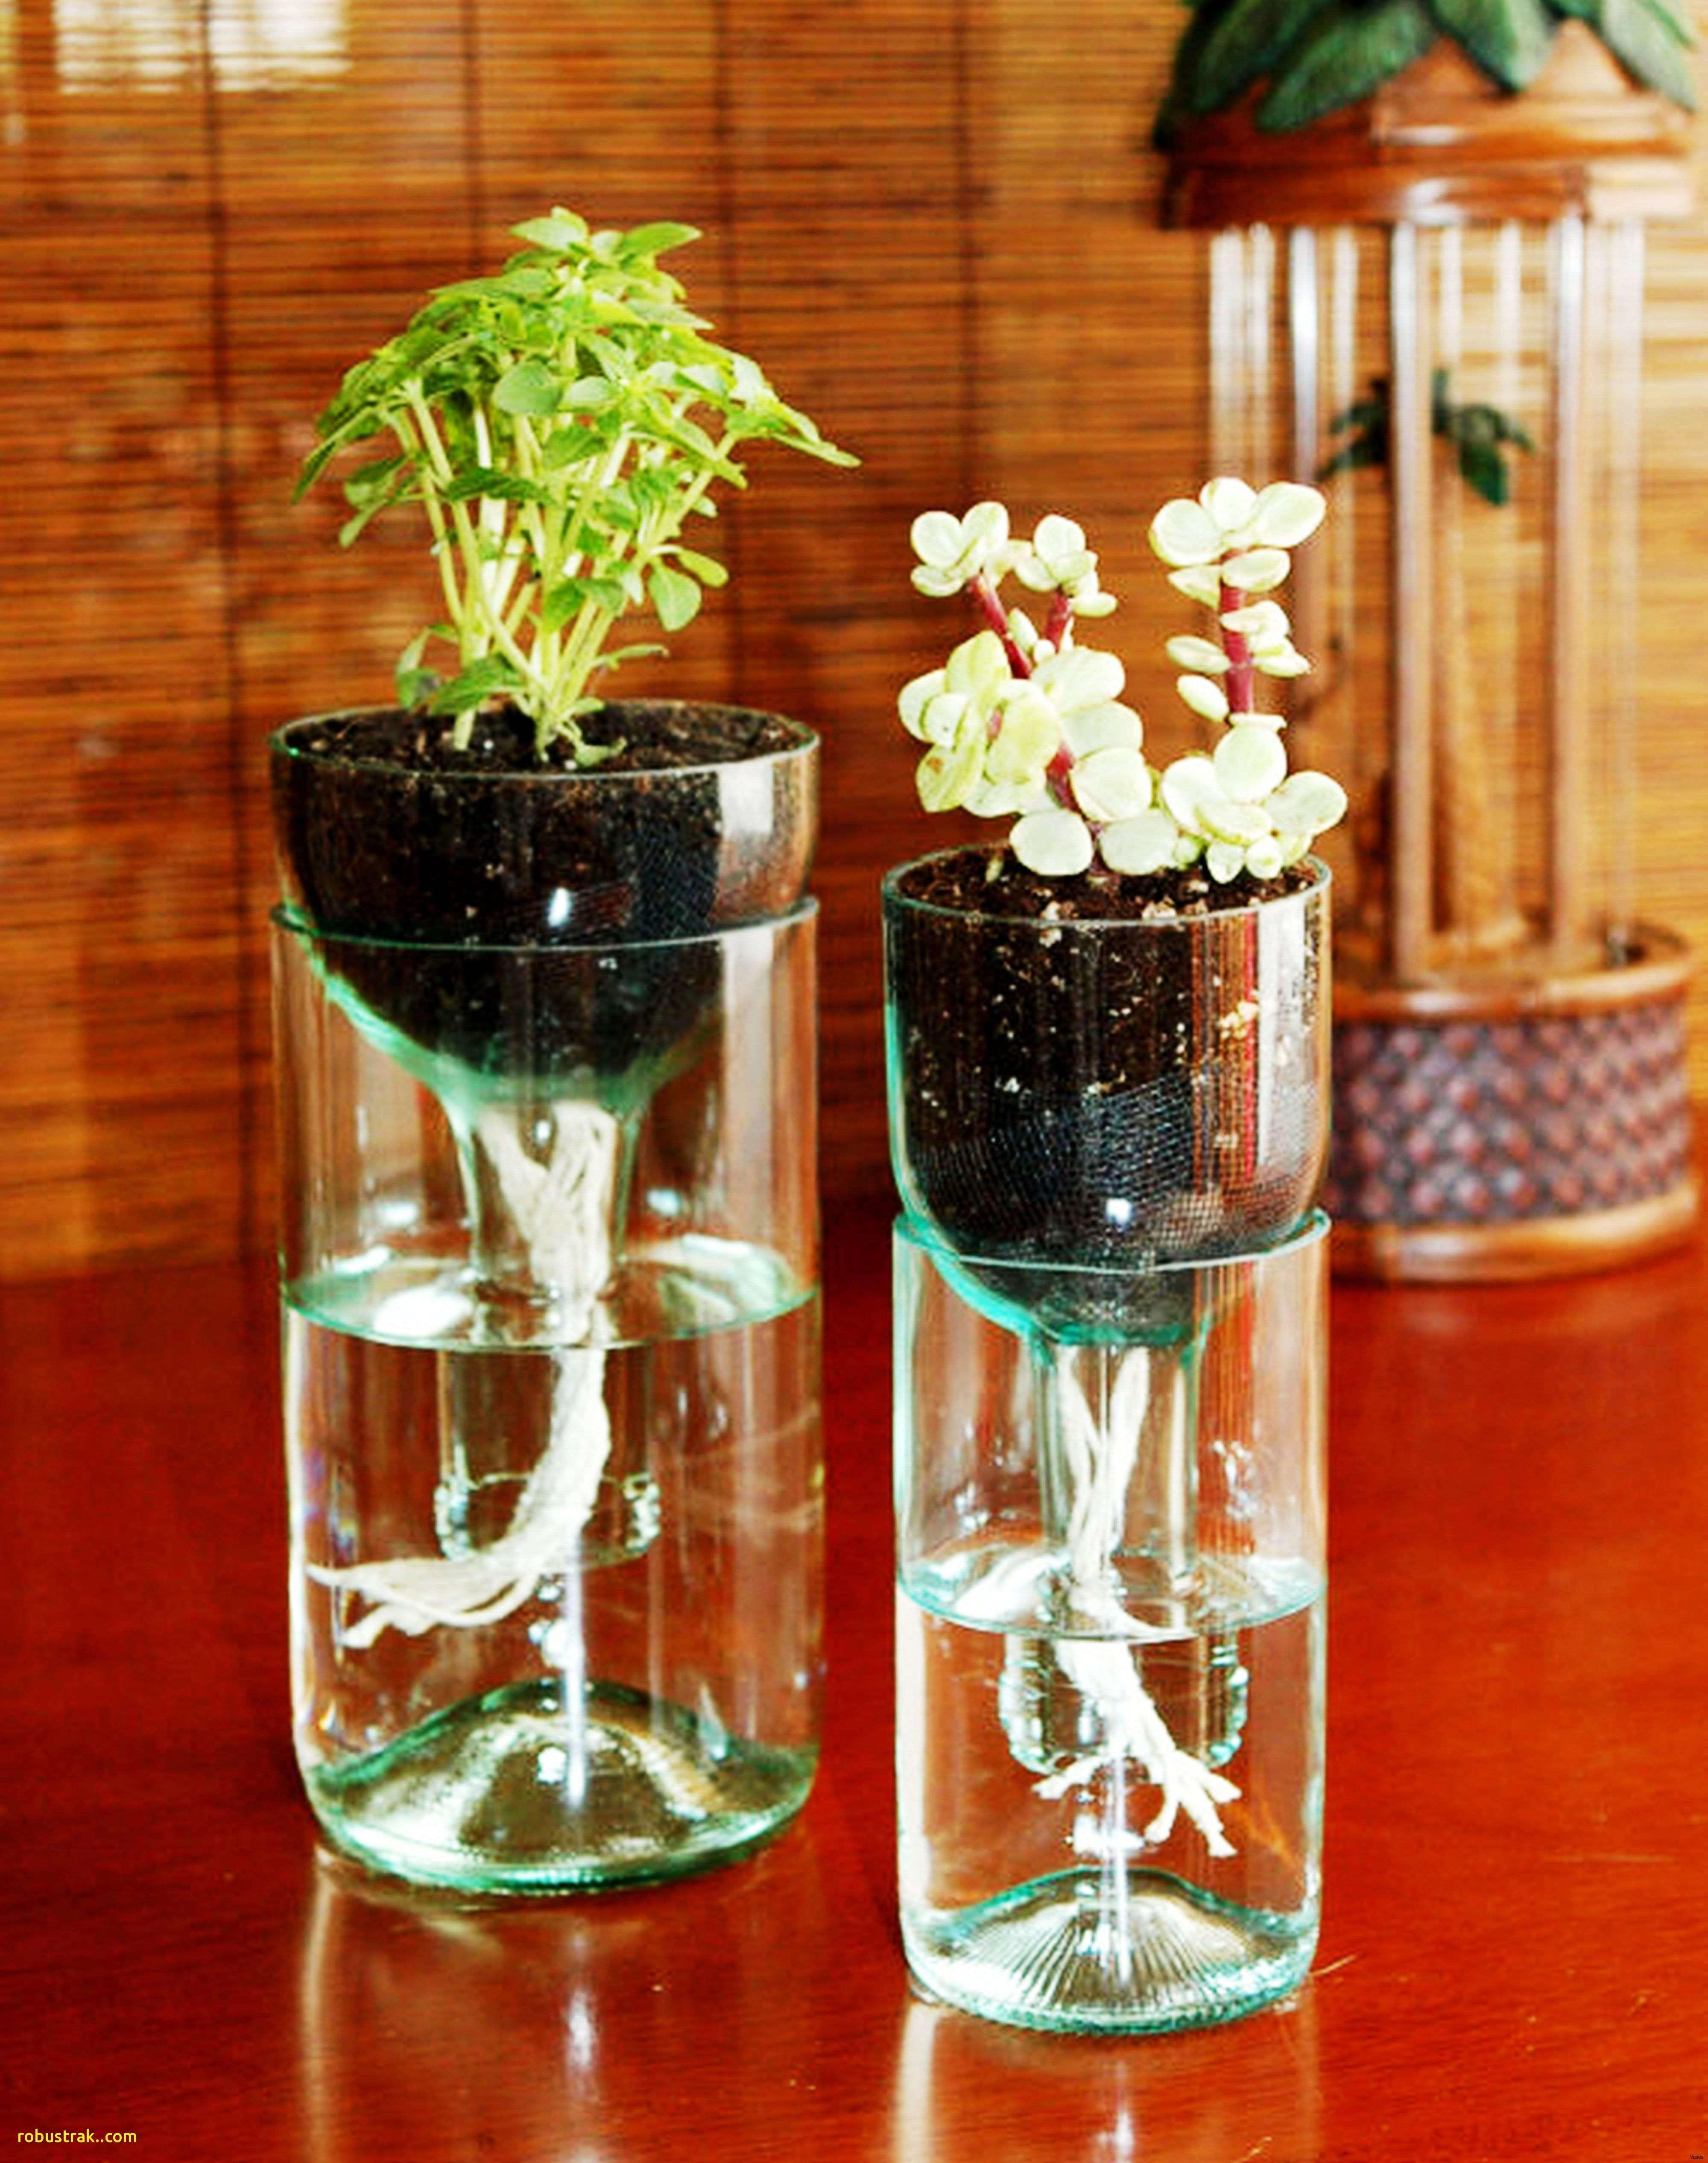 21 Famous Glass Floor Vase Ideas 2024 free download glass floor vase ideas of 27 fresh of christmas vase ideas christmas decor ideas with regard to glass bowl centerpiece decorating ideas awesome unique glass bowl centerpiece decorating ideas